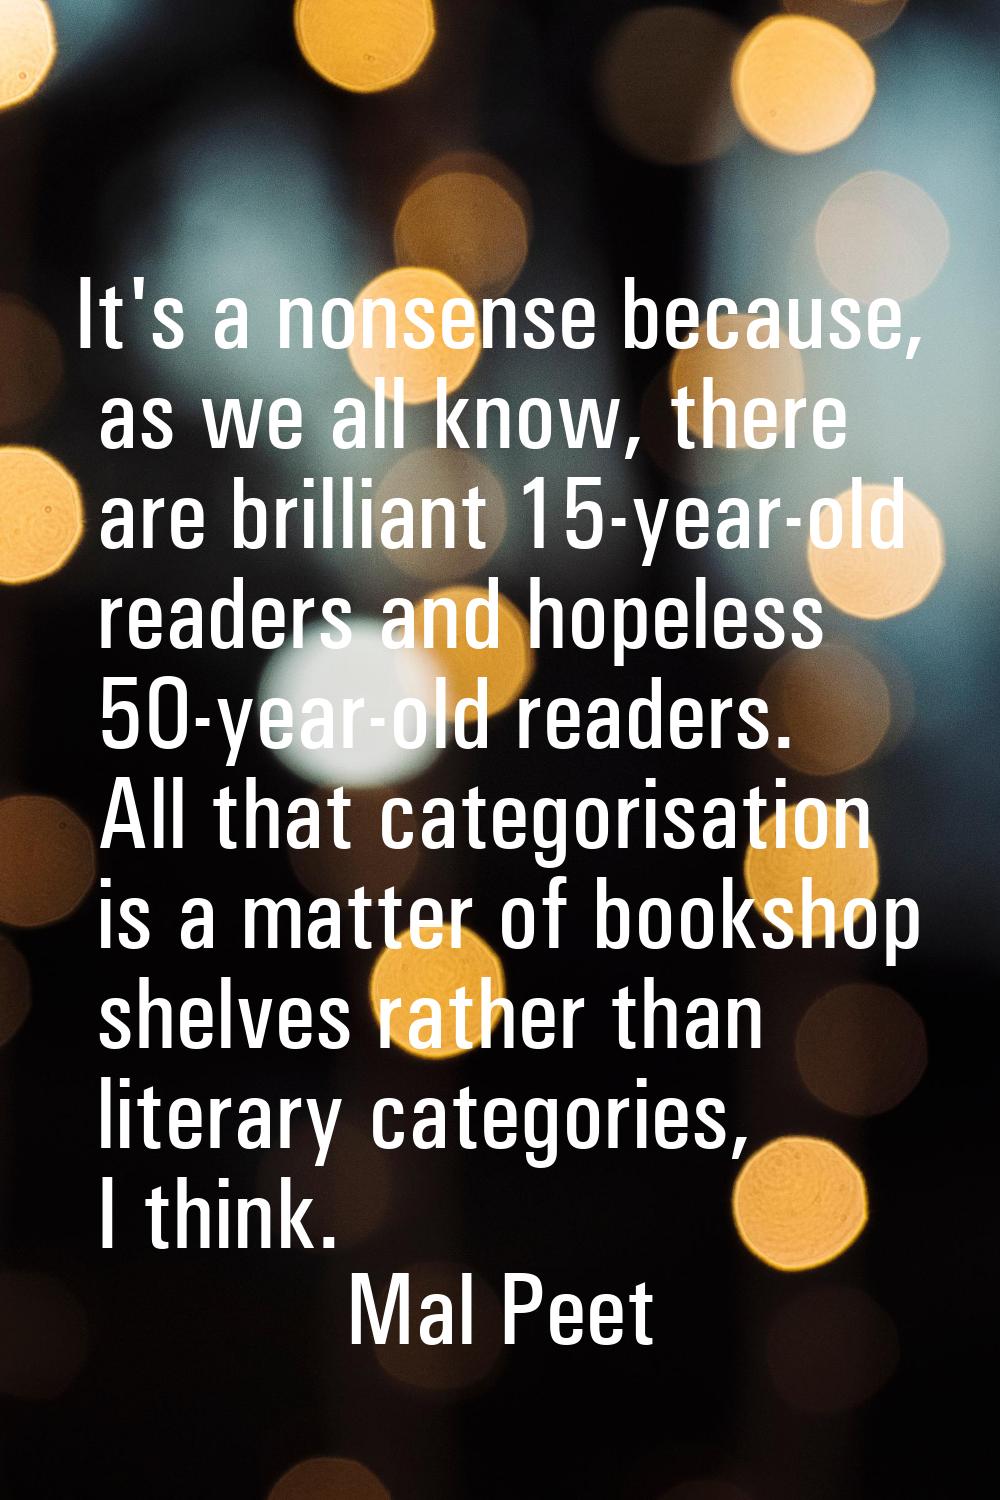 It's a nonsense because, as we all know, there are brilliant 15-year-old readers and hopeless 50-ye